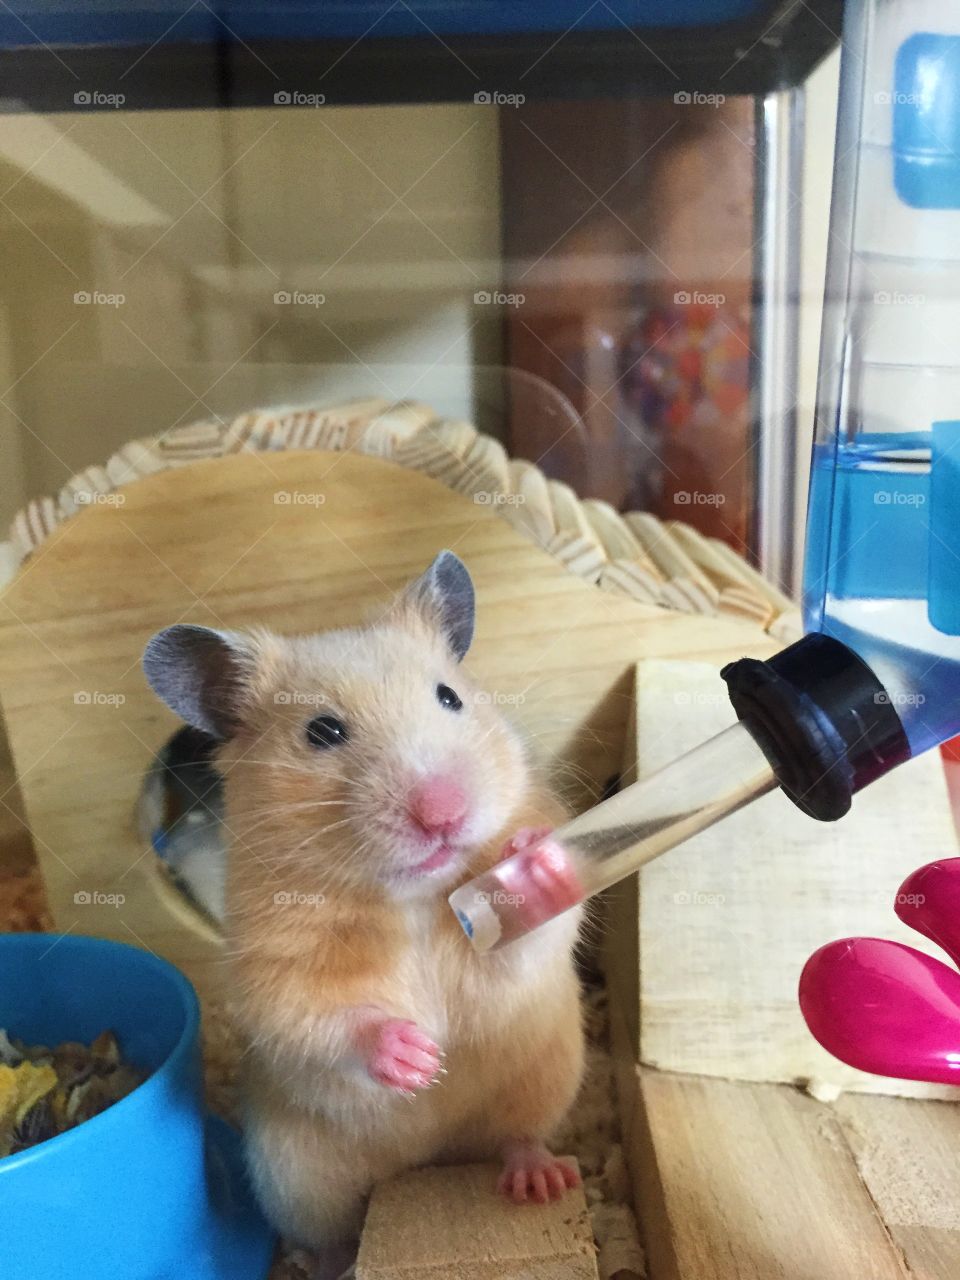 My little hamster says:" what you looking at me?"